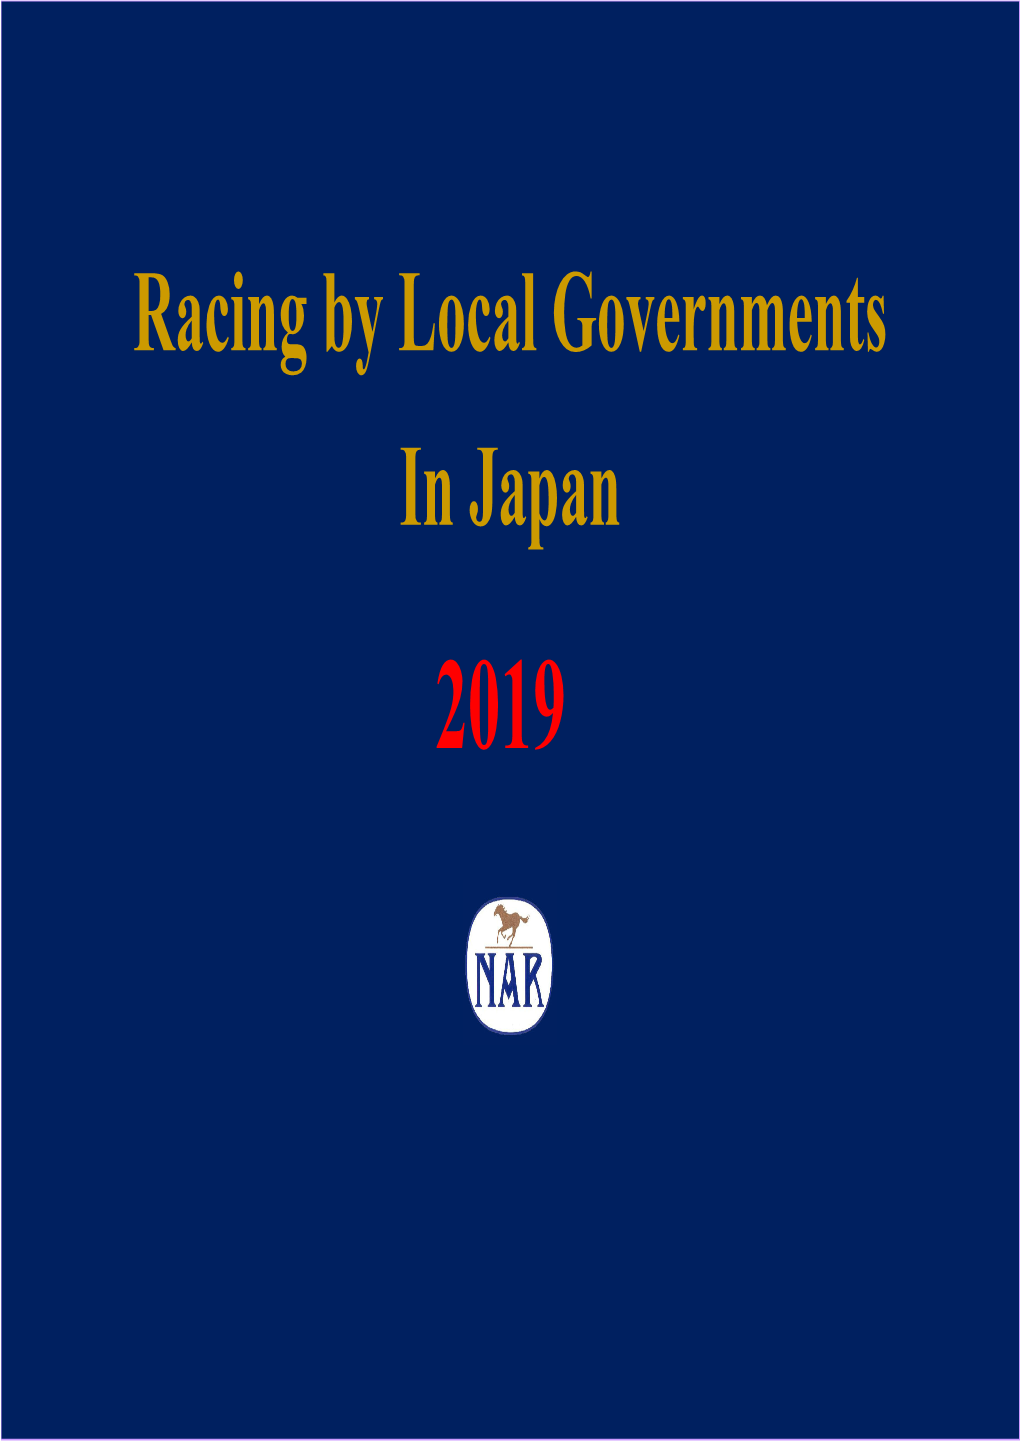 Racing by Local Governments in Japan